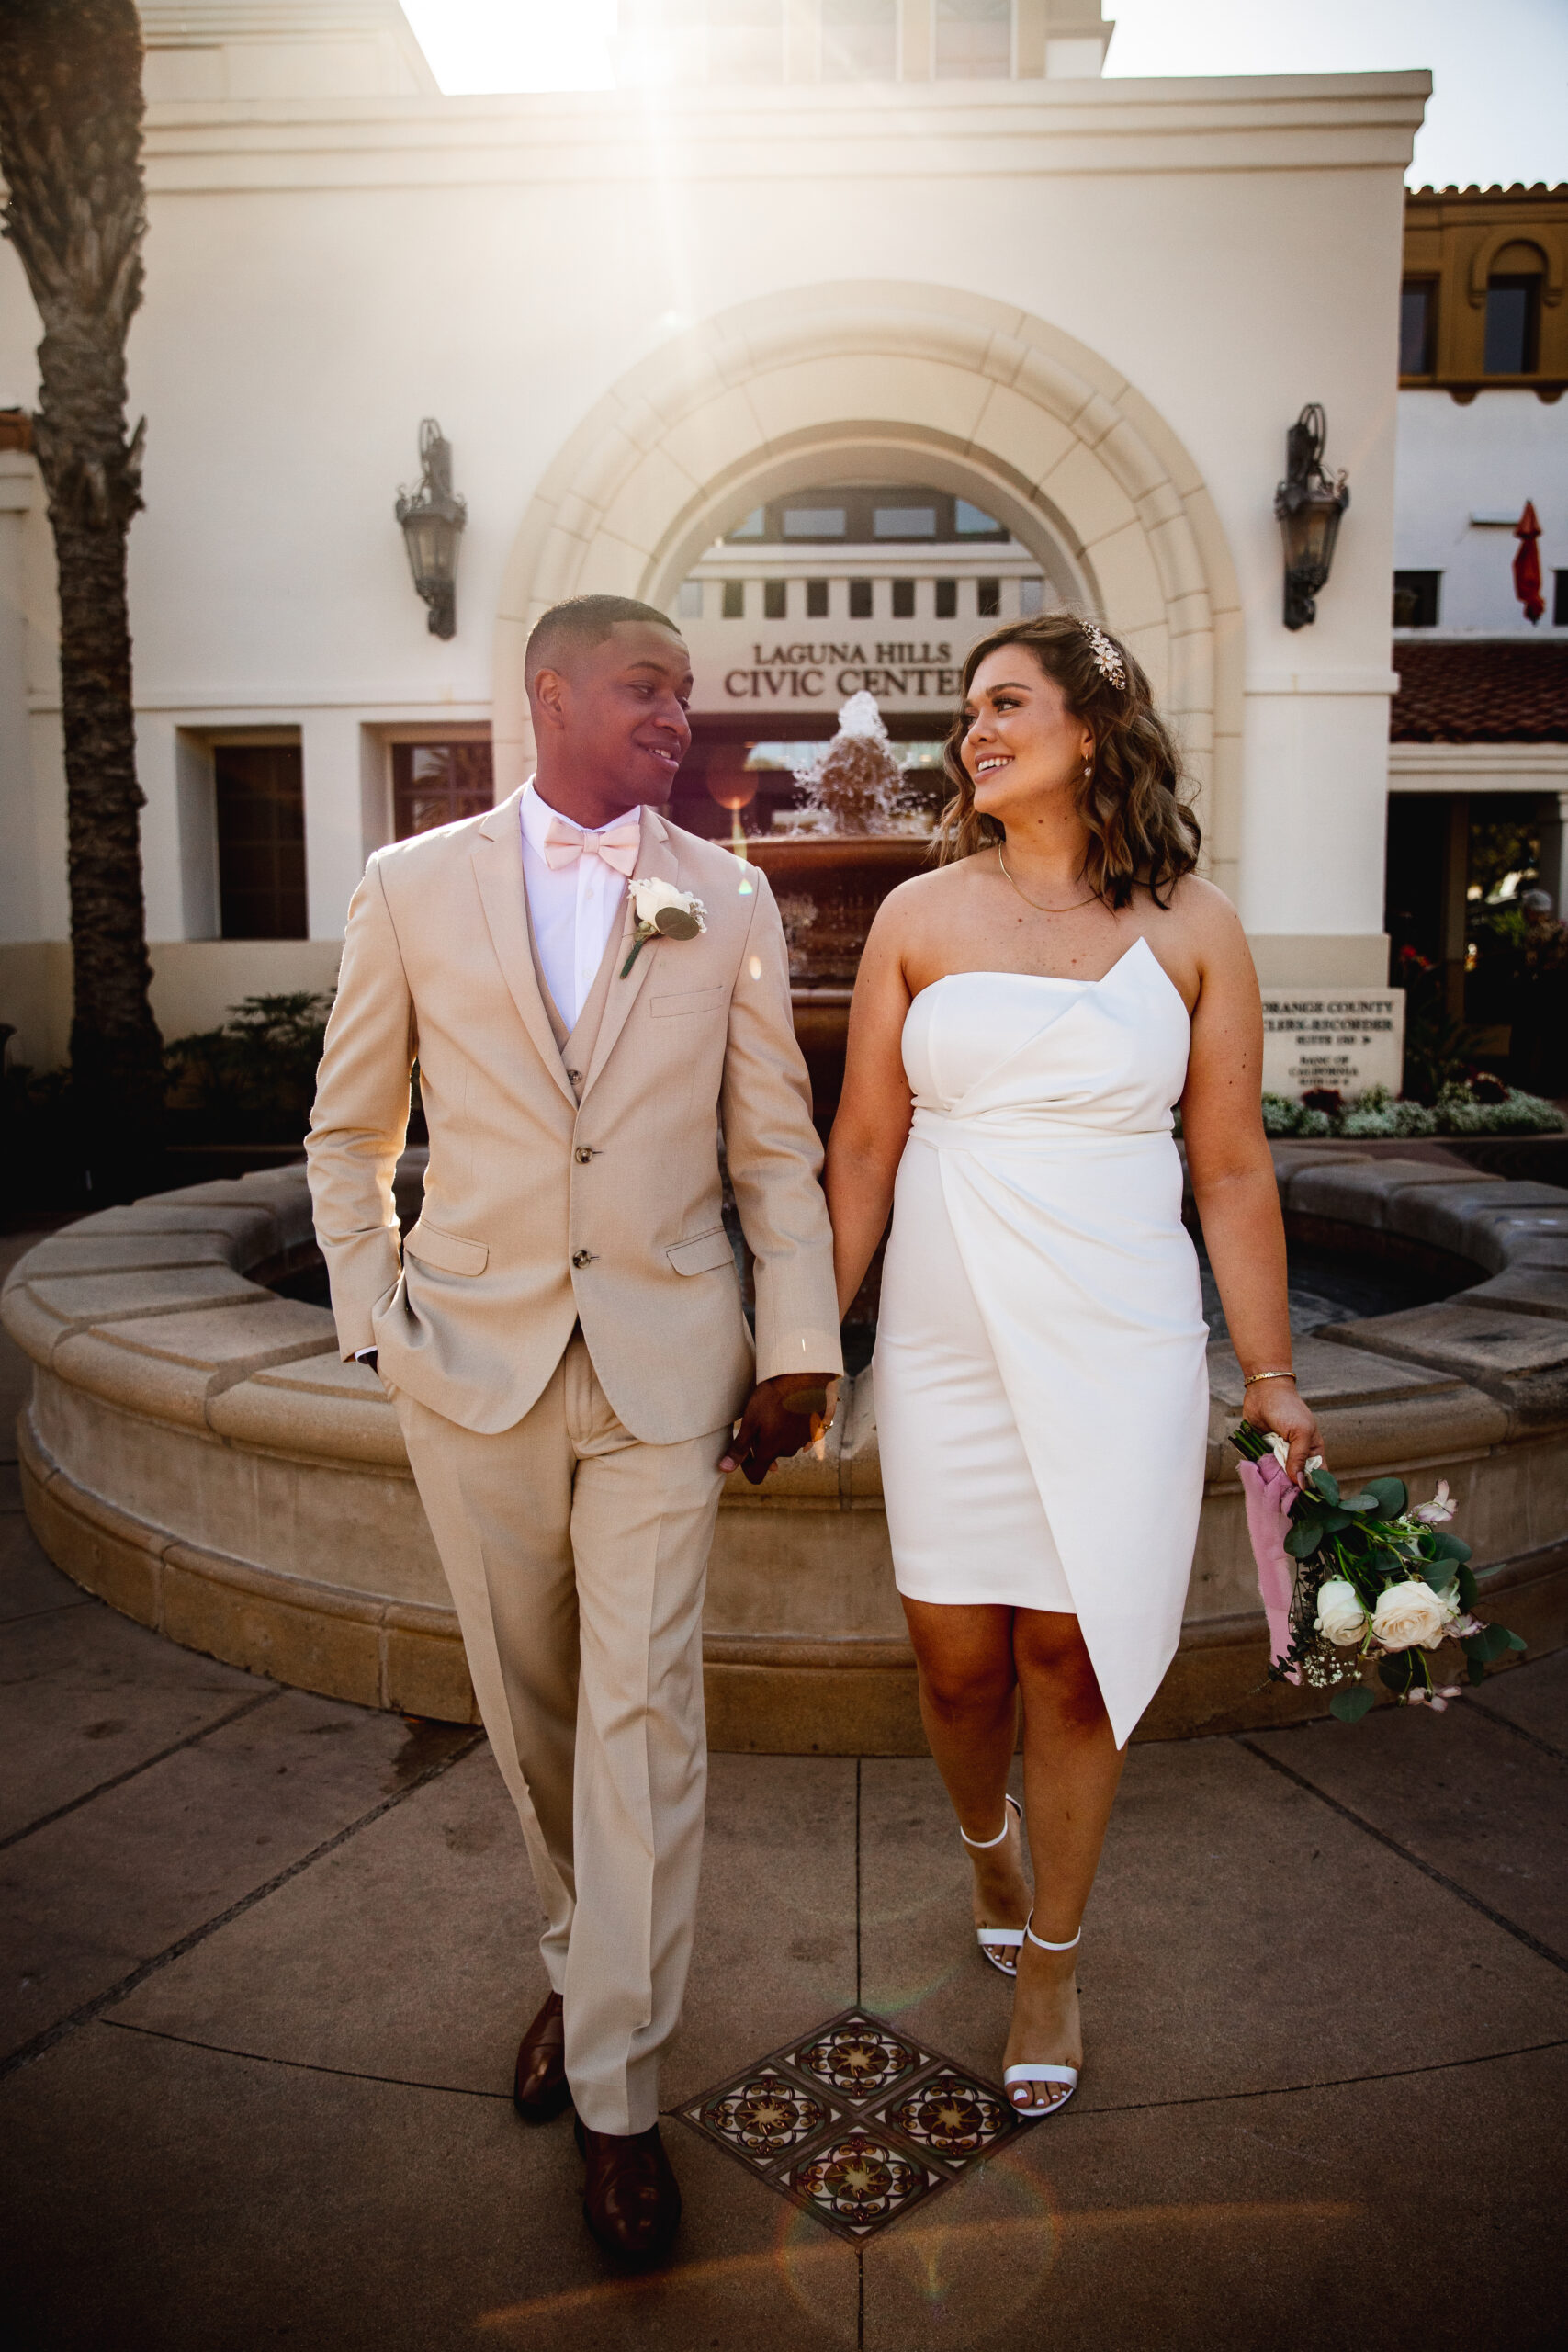 Interracial couple newly married at Laguna Hills Civic Courthouse after their civil wedding ceremony.